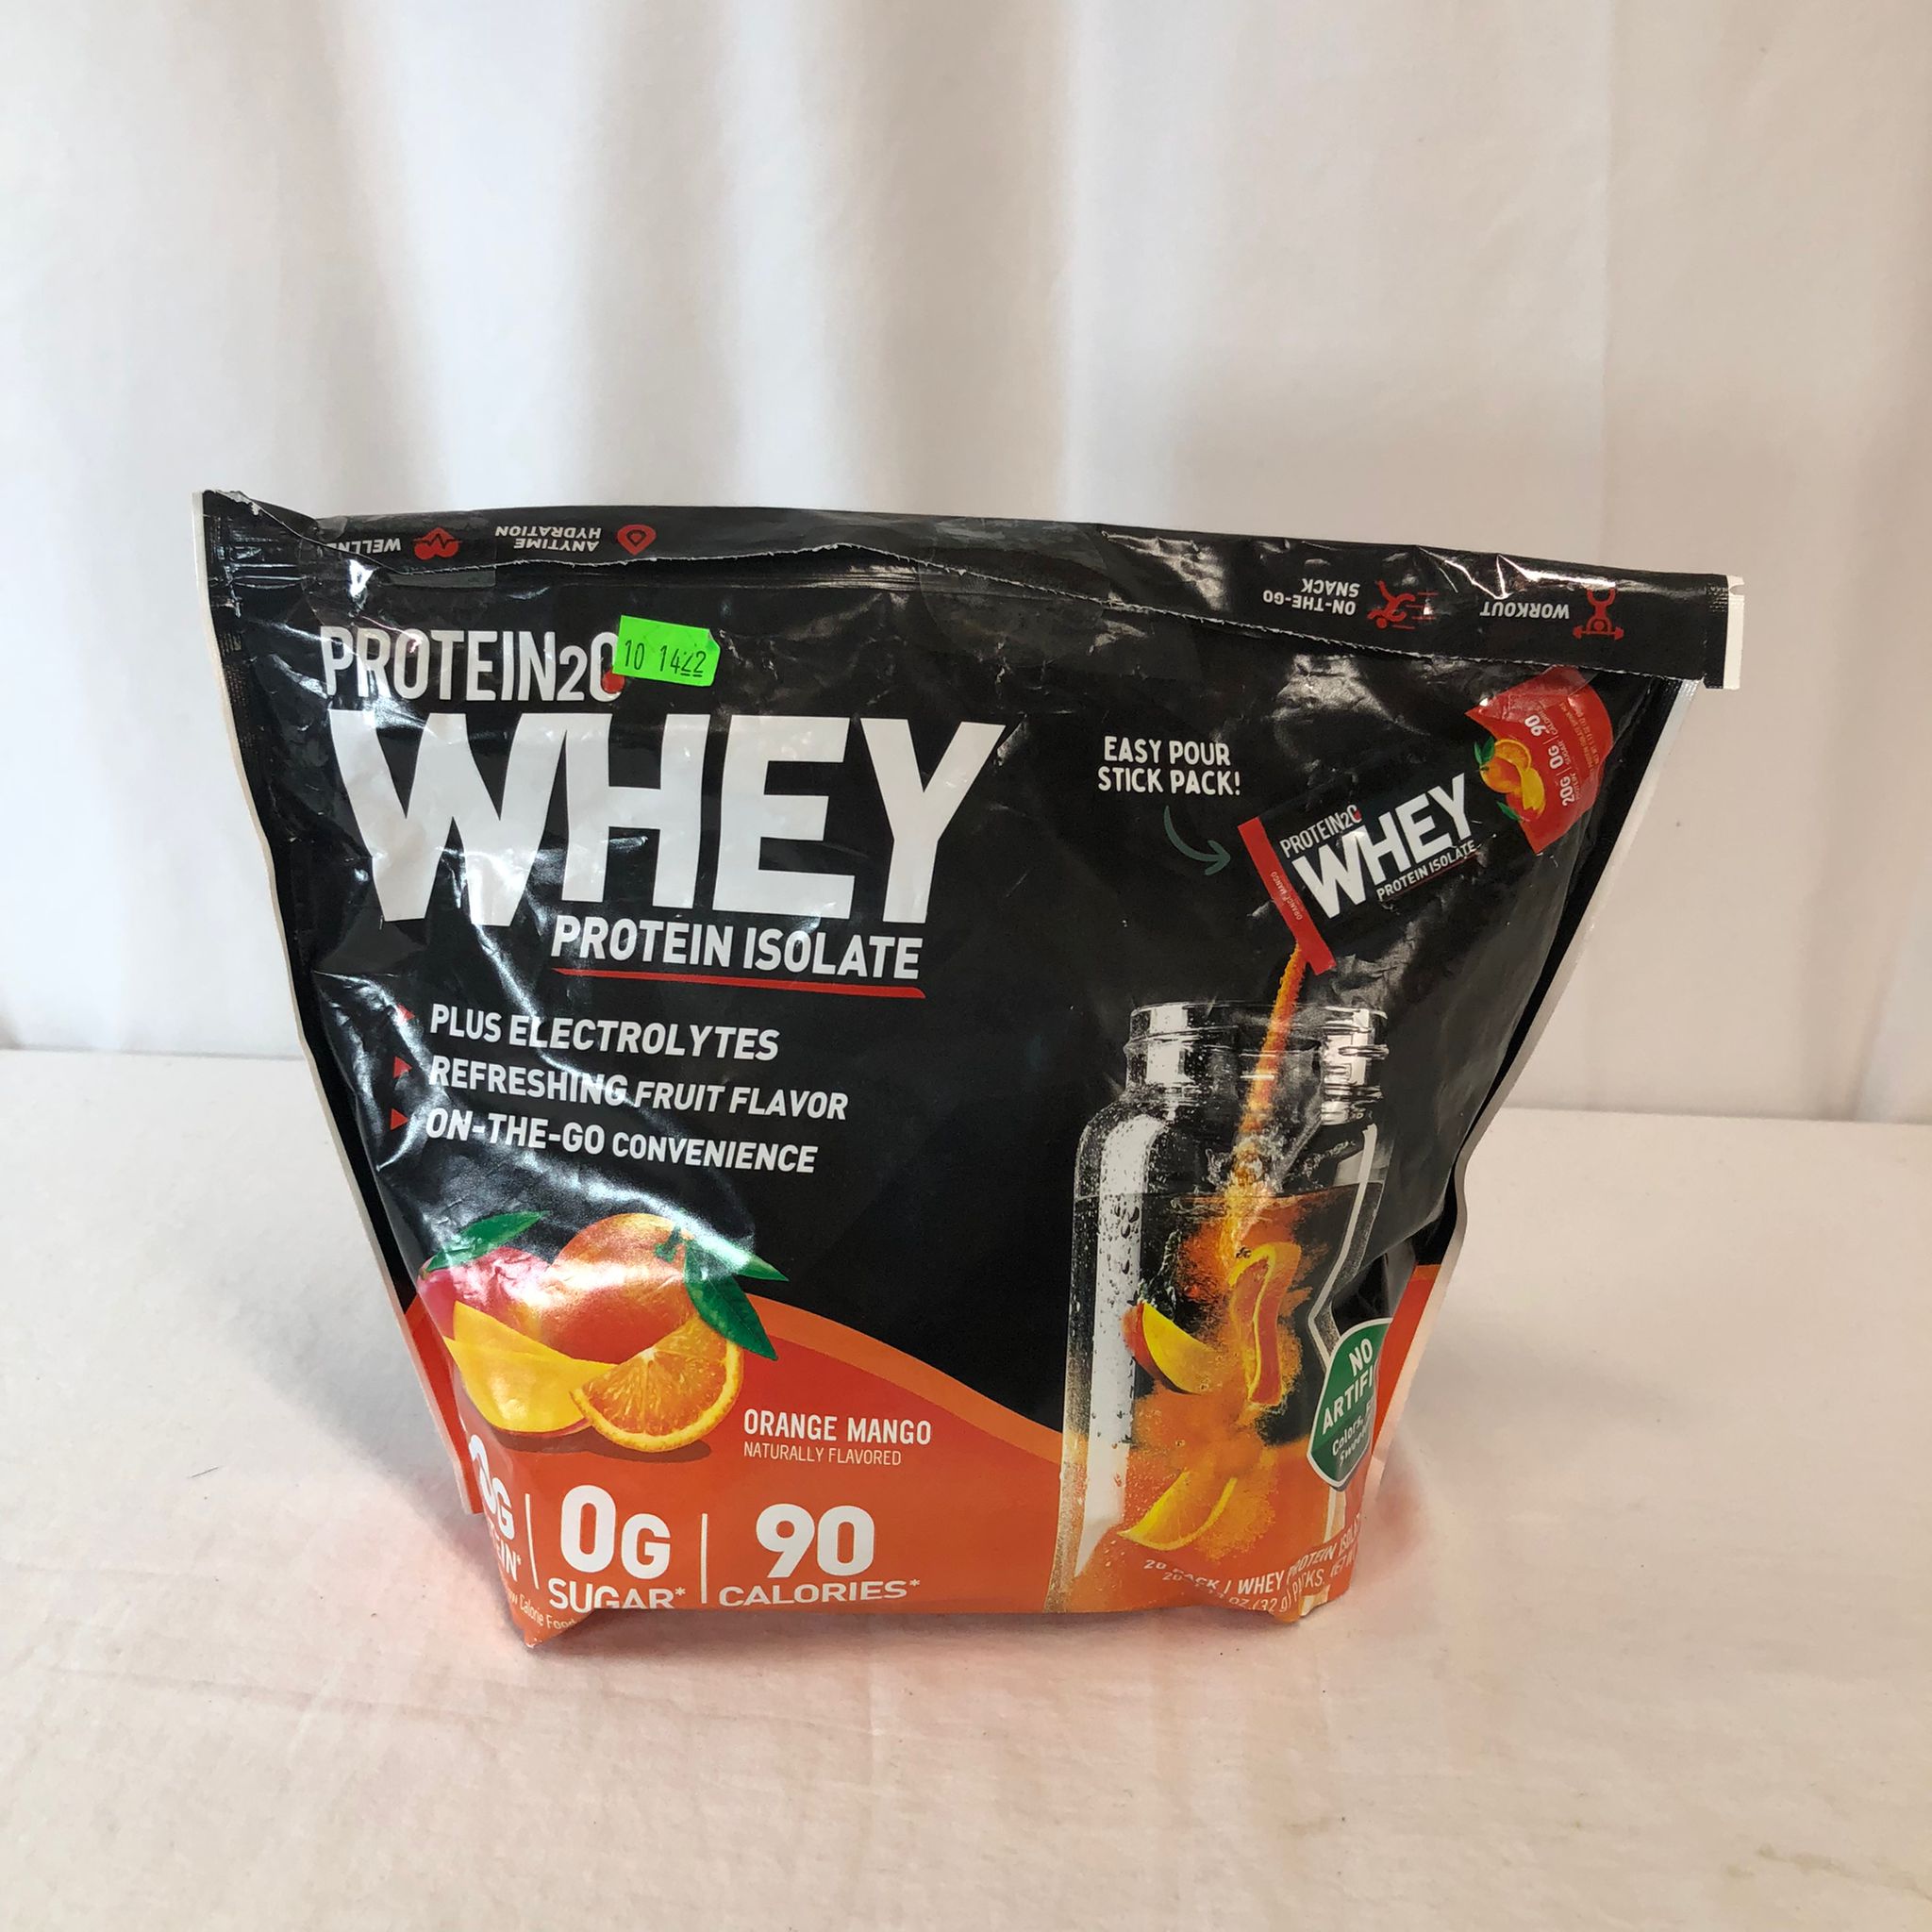 As is Protein2o Whey Protein Isolate 18-Stick Pack